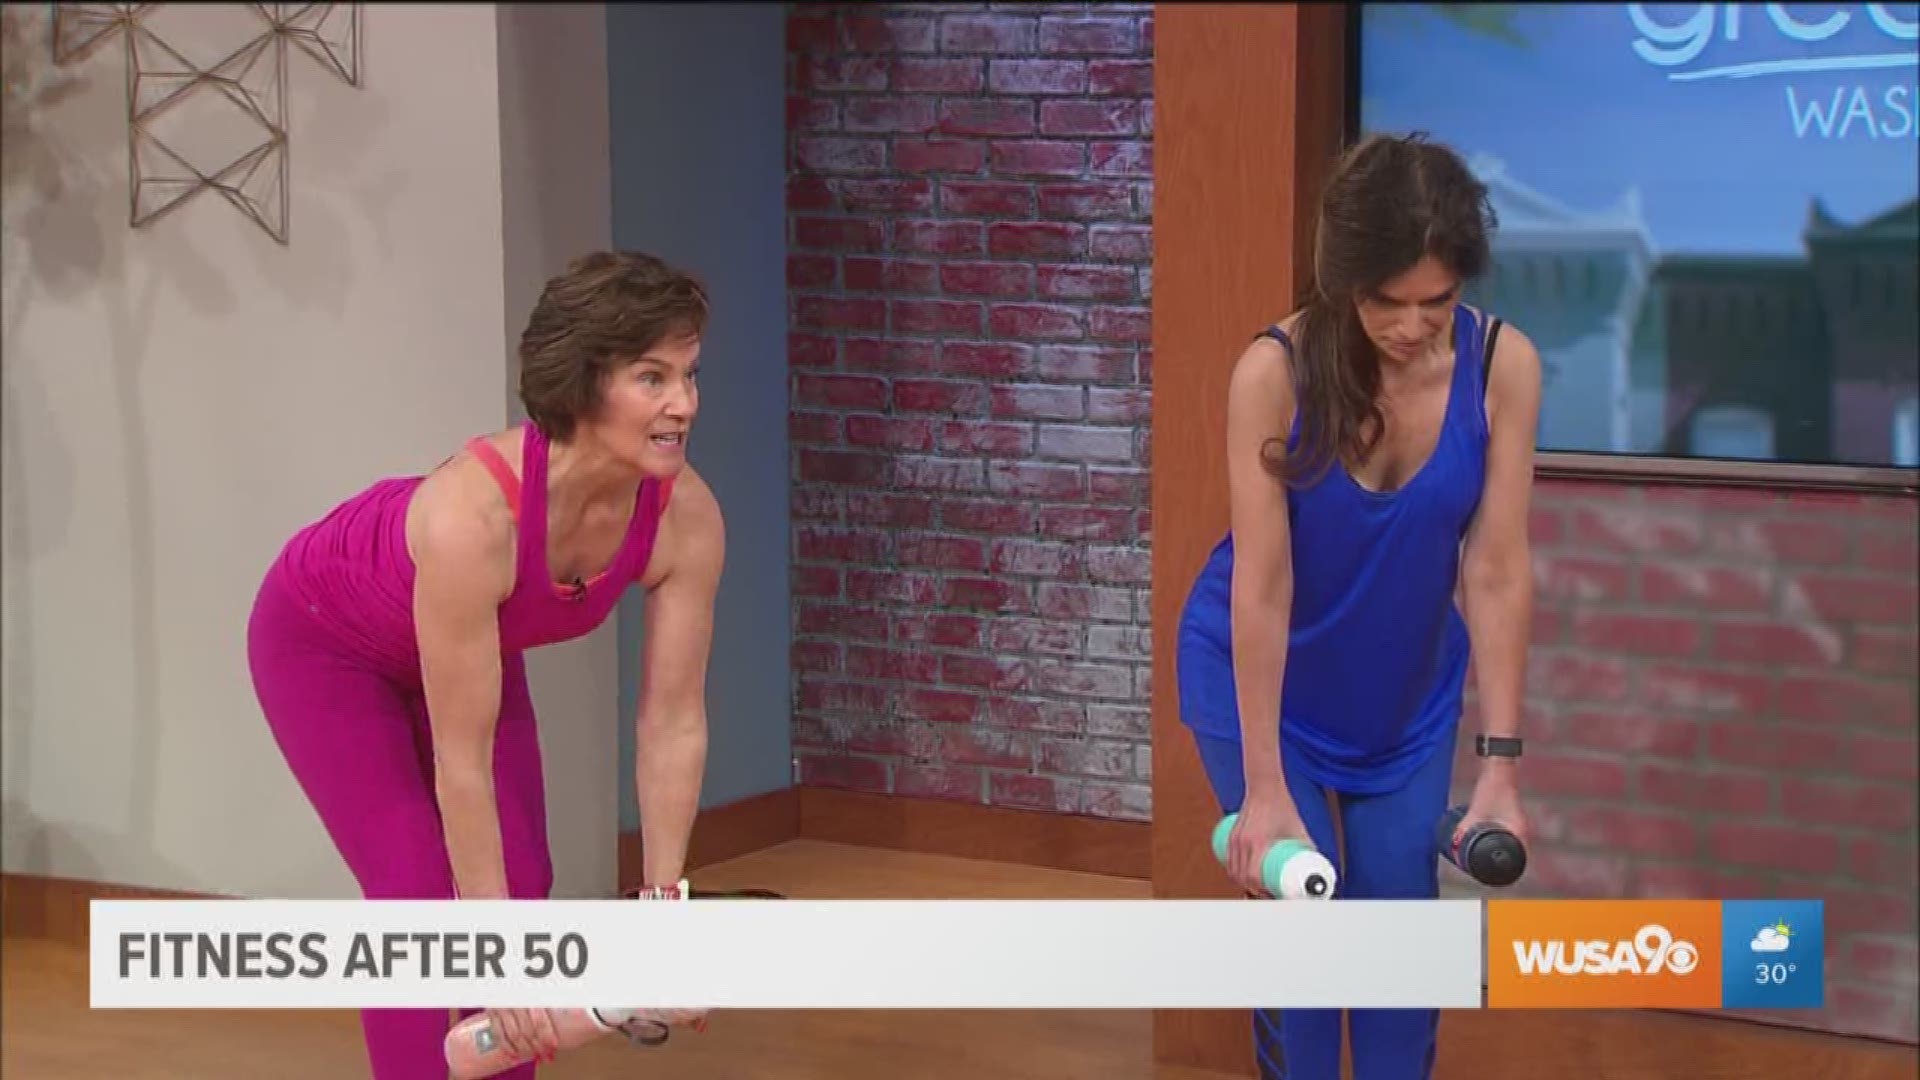 Debra Atkinson, CEO of Flipping 50 and author of "Hot Not Bothered" And 'You Still Got It Girl", shares how to select a trainer as you start to get older and offers training tips and techniques for women over 50.